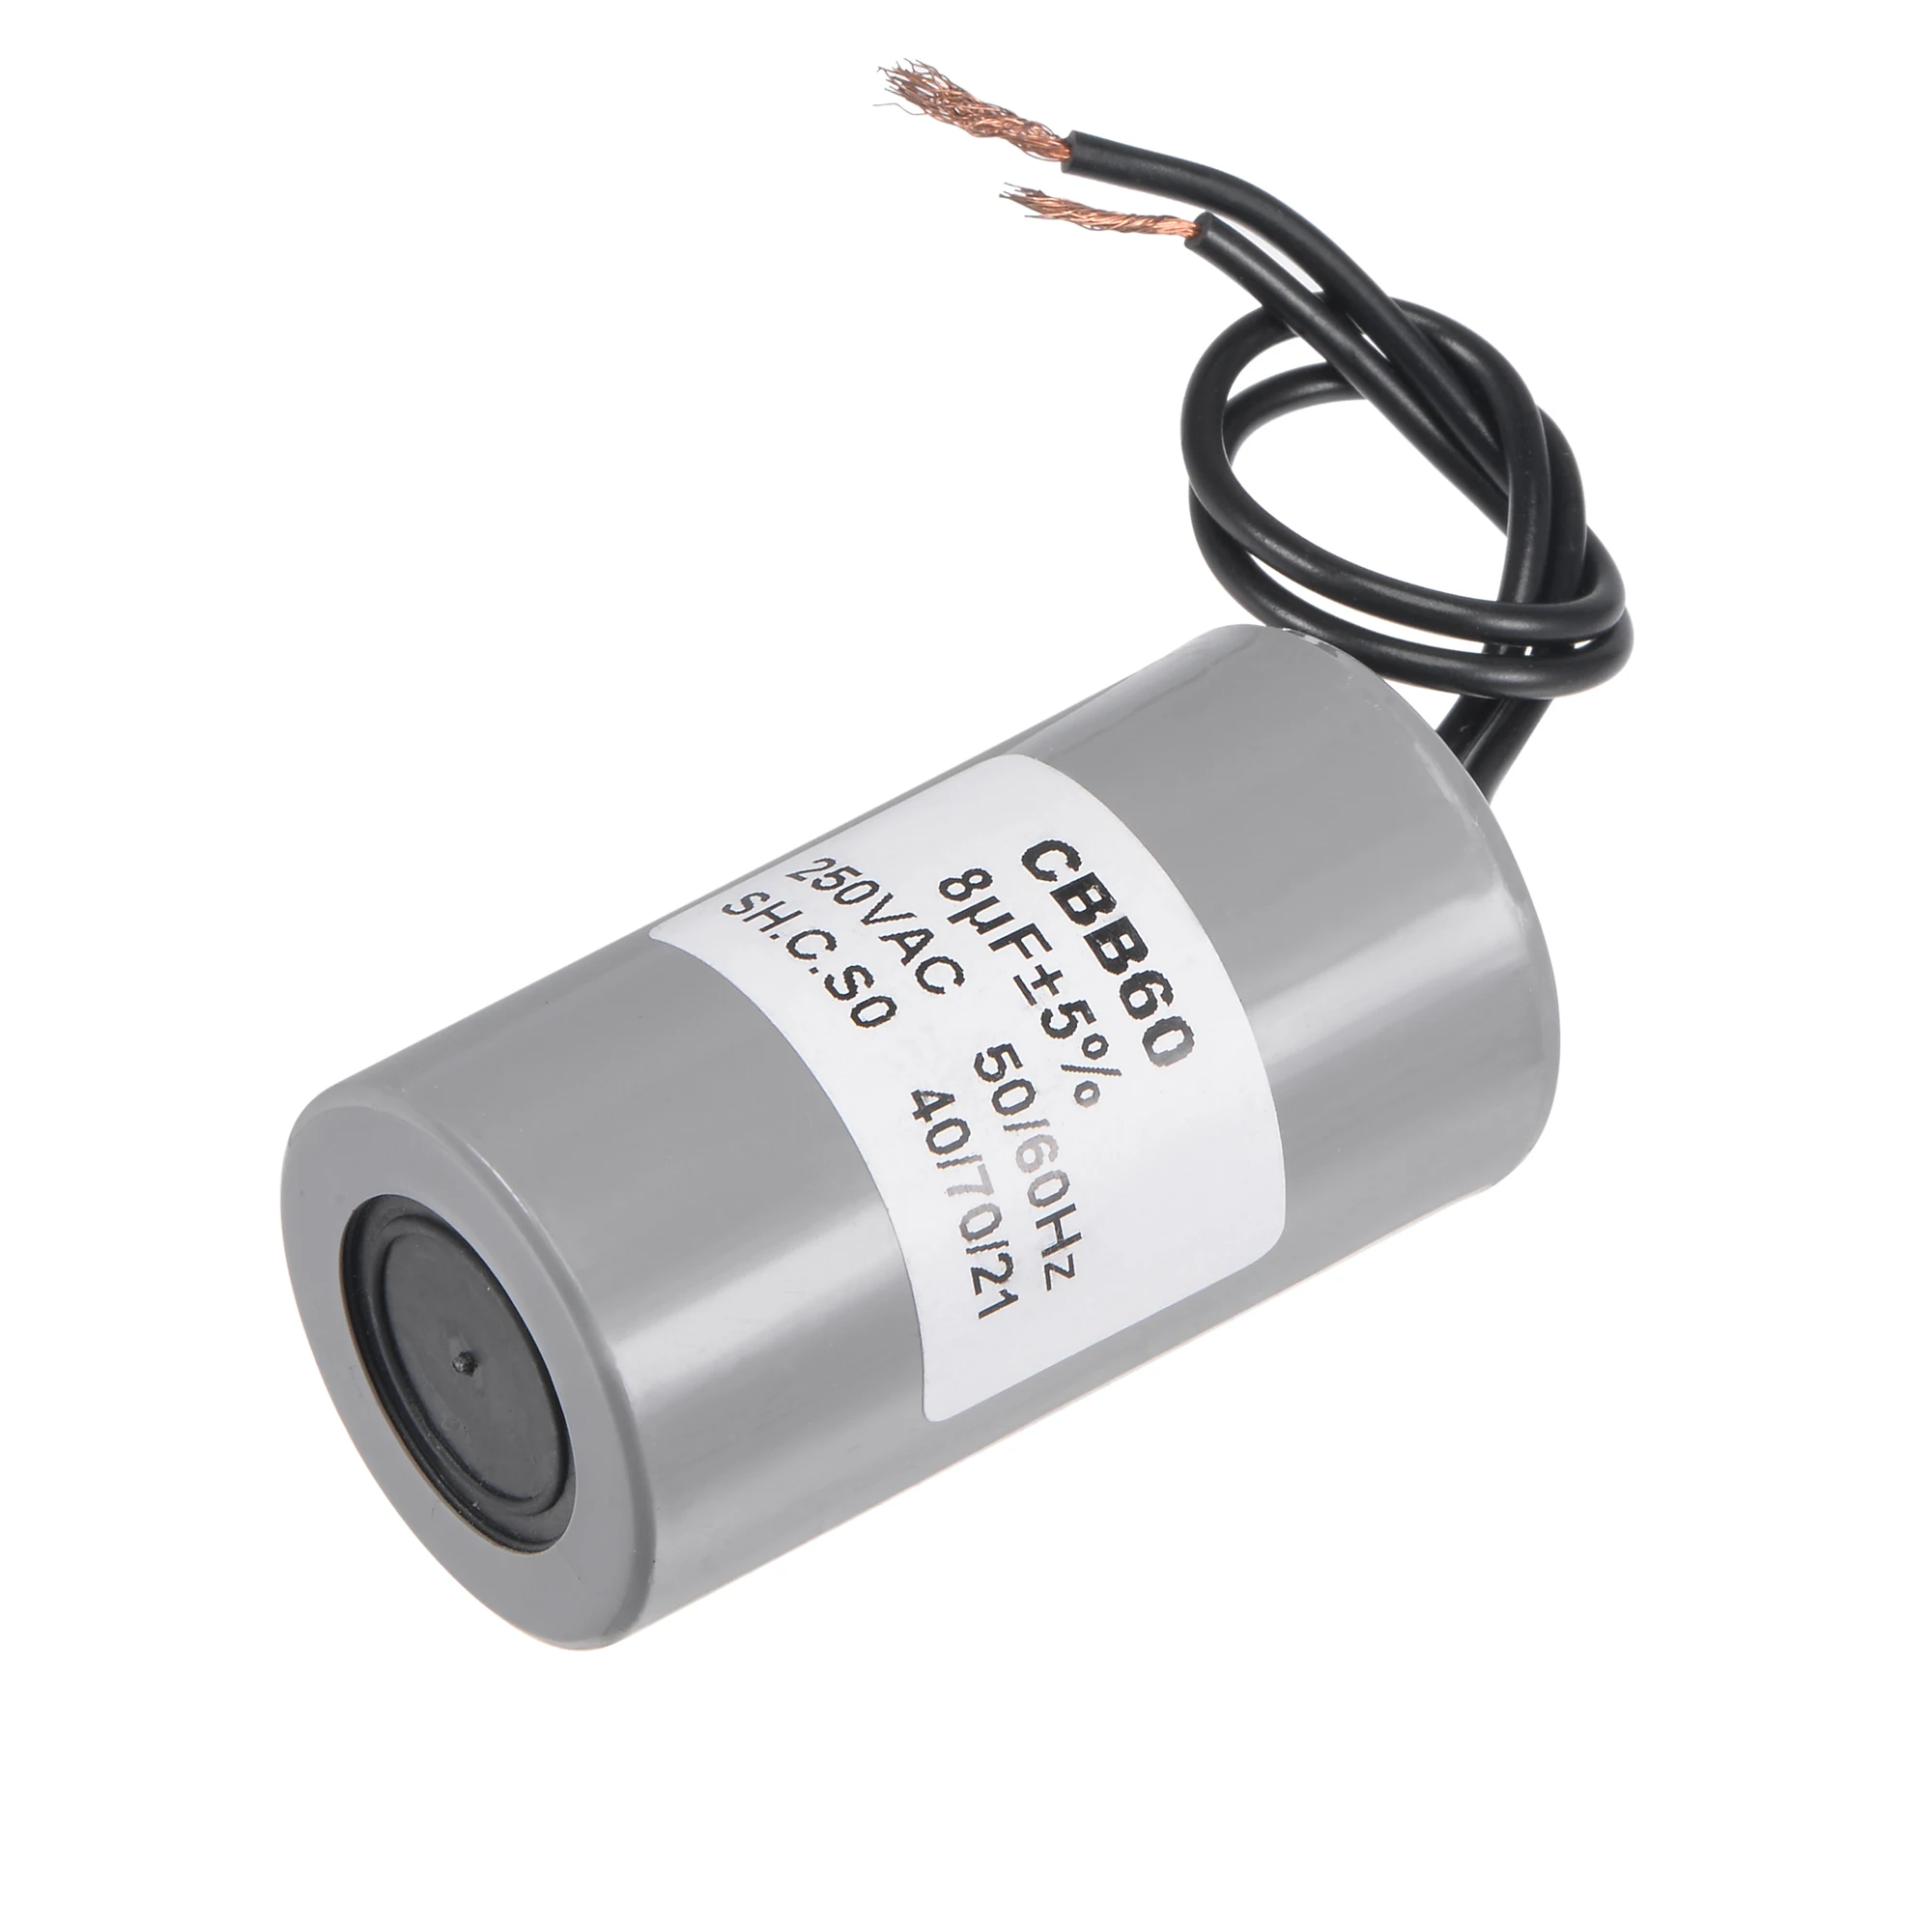 1Pcs 8uF CBB60 Motor Run Capacitor 250V AC 2 Wires 50/60Hz Cylinder 65x34mm for Air Compressor Water Pump Motor